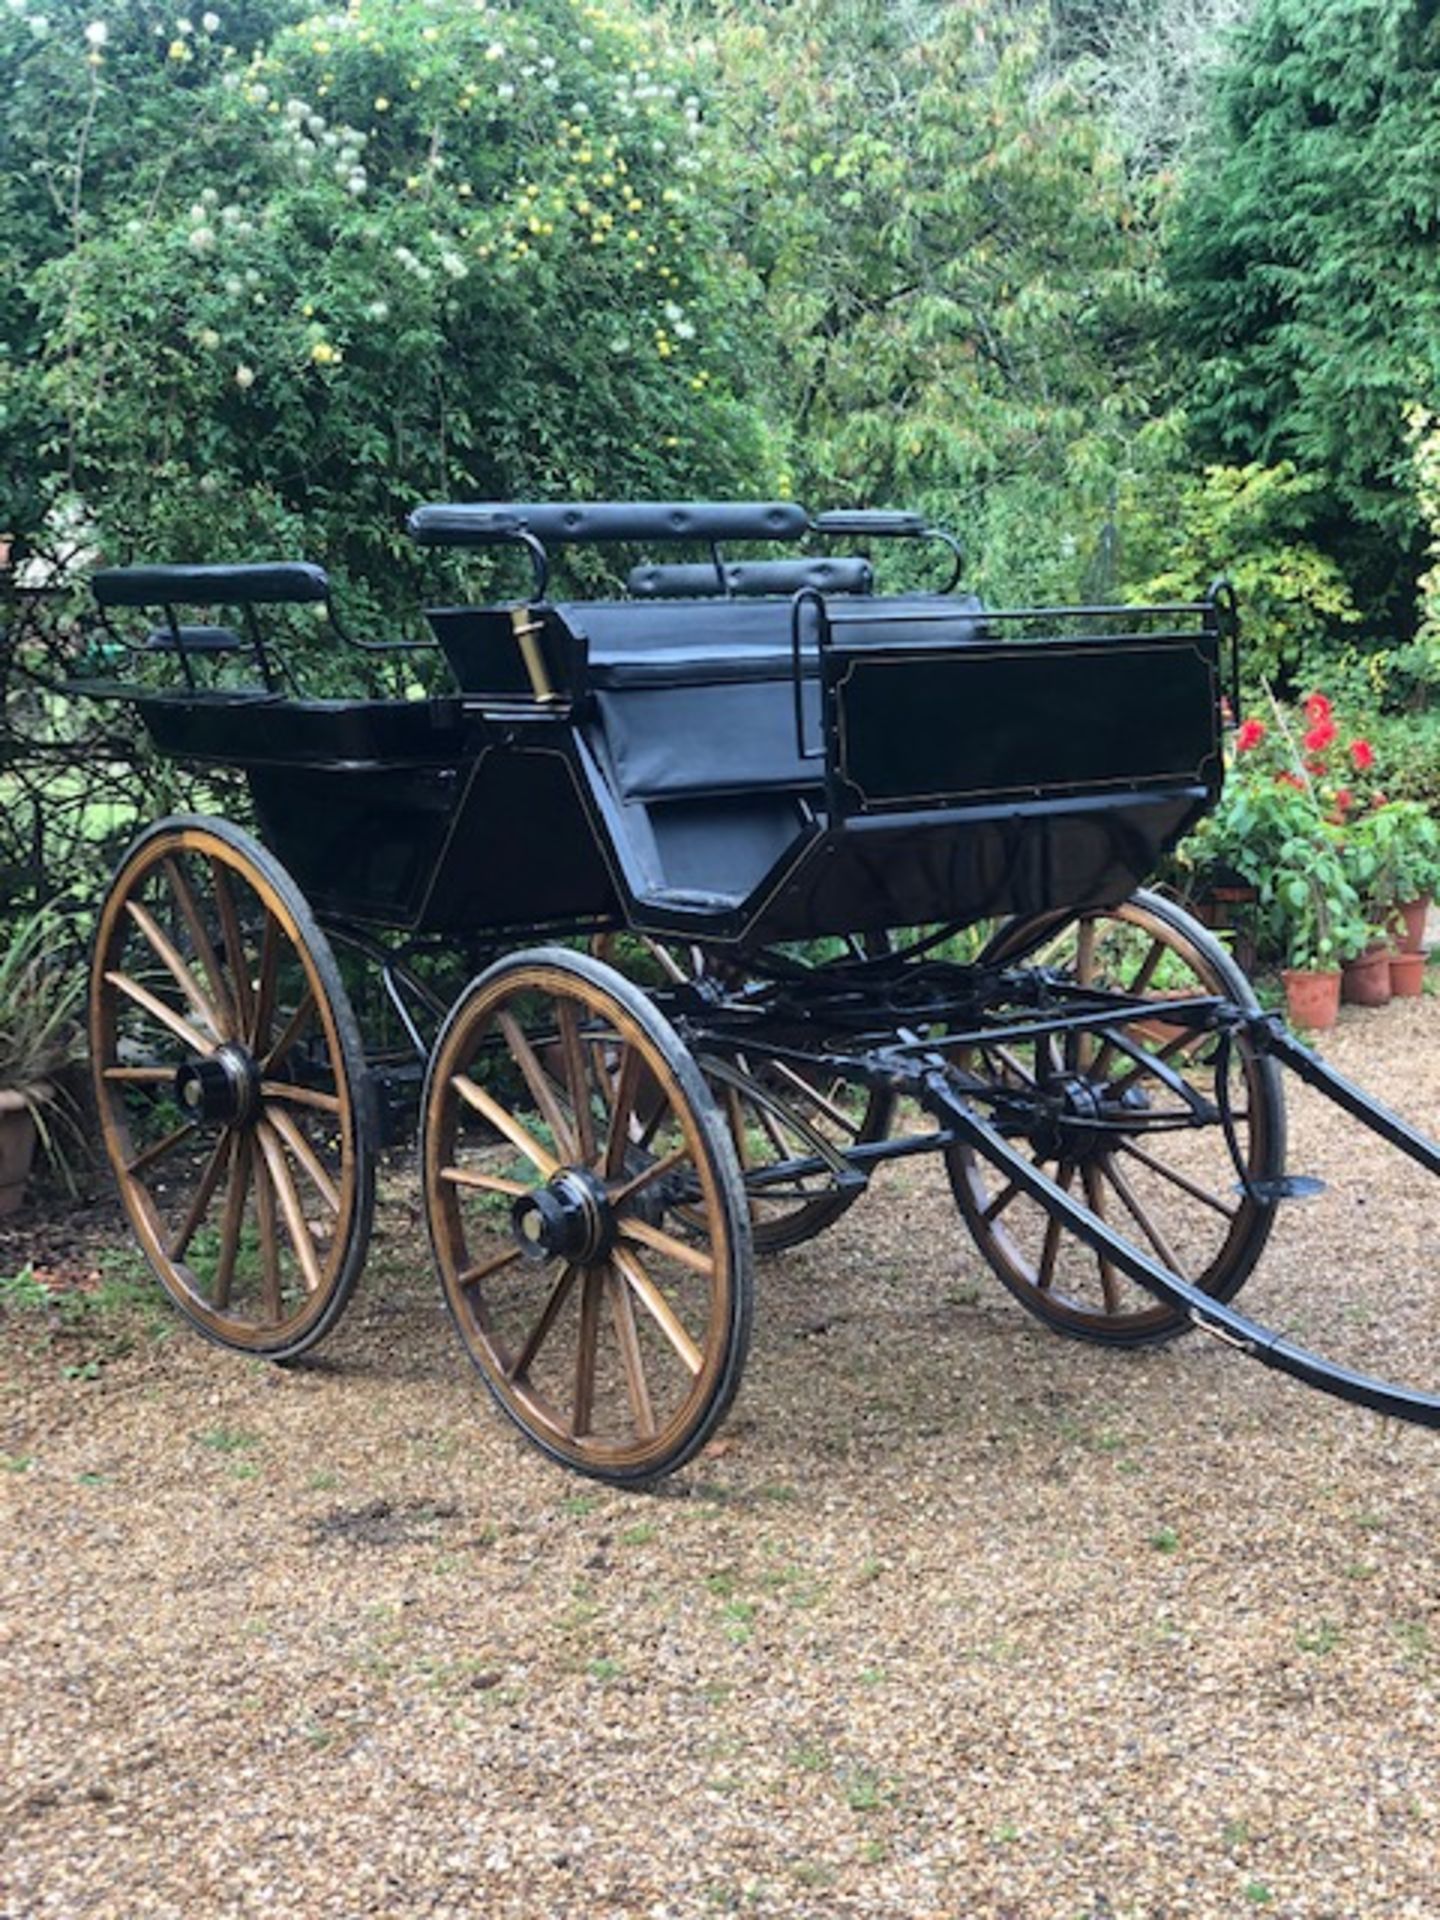 WAGONETTE built by F.A. Carl Wolf or F.A. Kadner & Co of Rosswein, Germany circa 1890 - Bild 4 aus 5